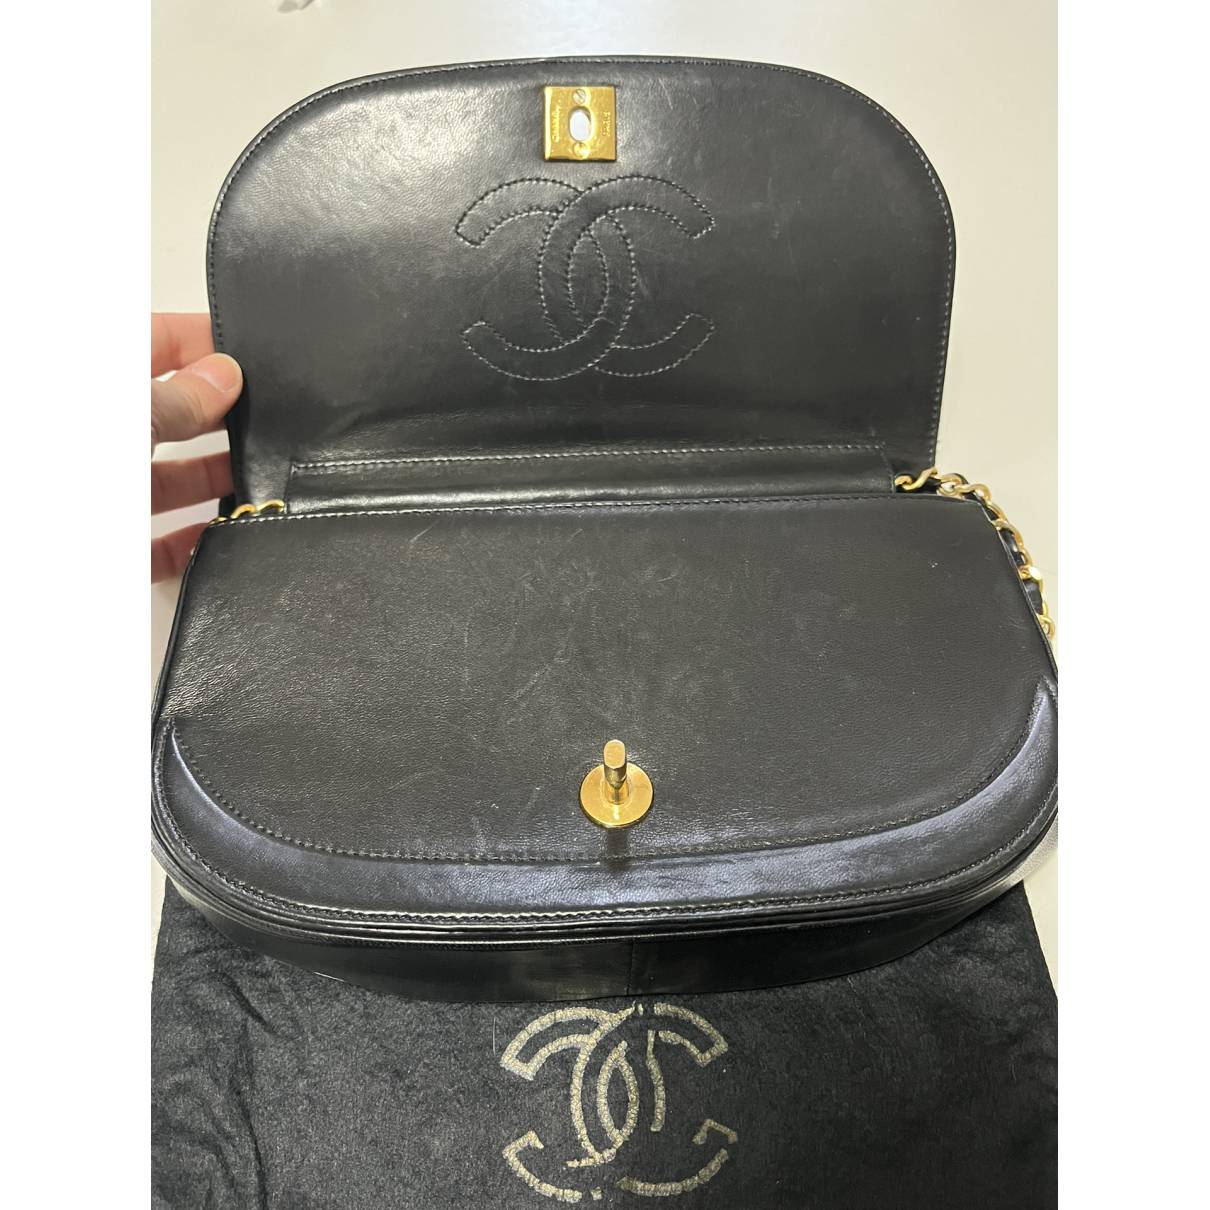 Chanel - Authenticated Timeless/Classique Handbag - Leather Black Plain for Women, Very Good Condition